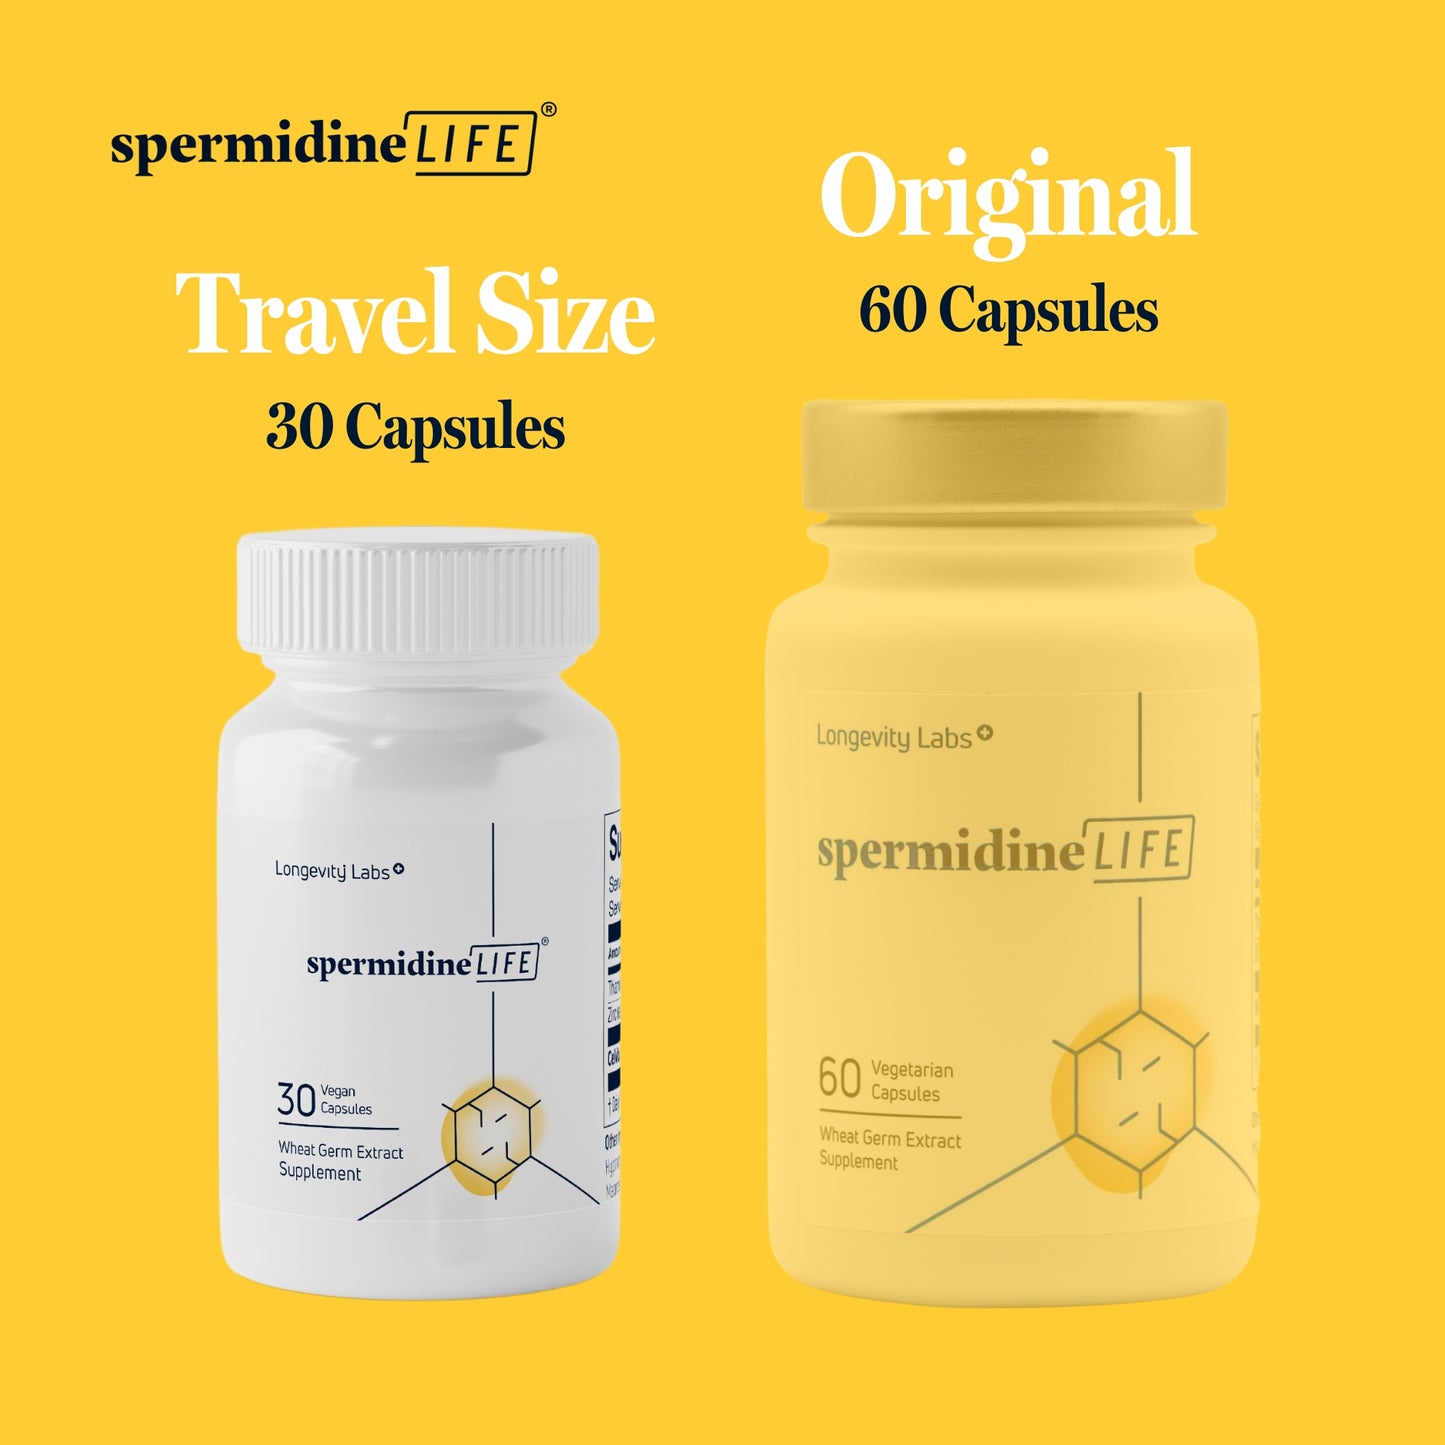 A travel-sized dietary supplement called spermidineLIFE® 400mg, specially formulated with Longevity Labs, Inc for cellular renewal.